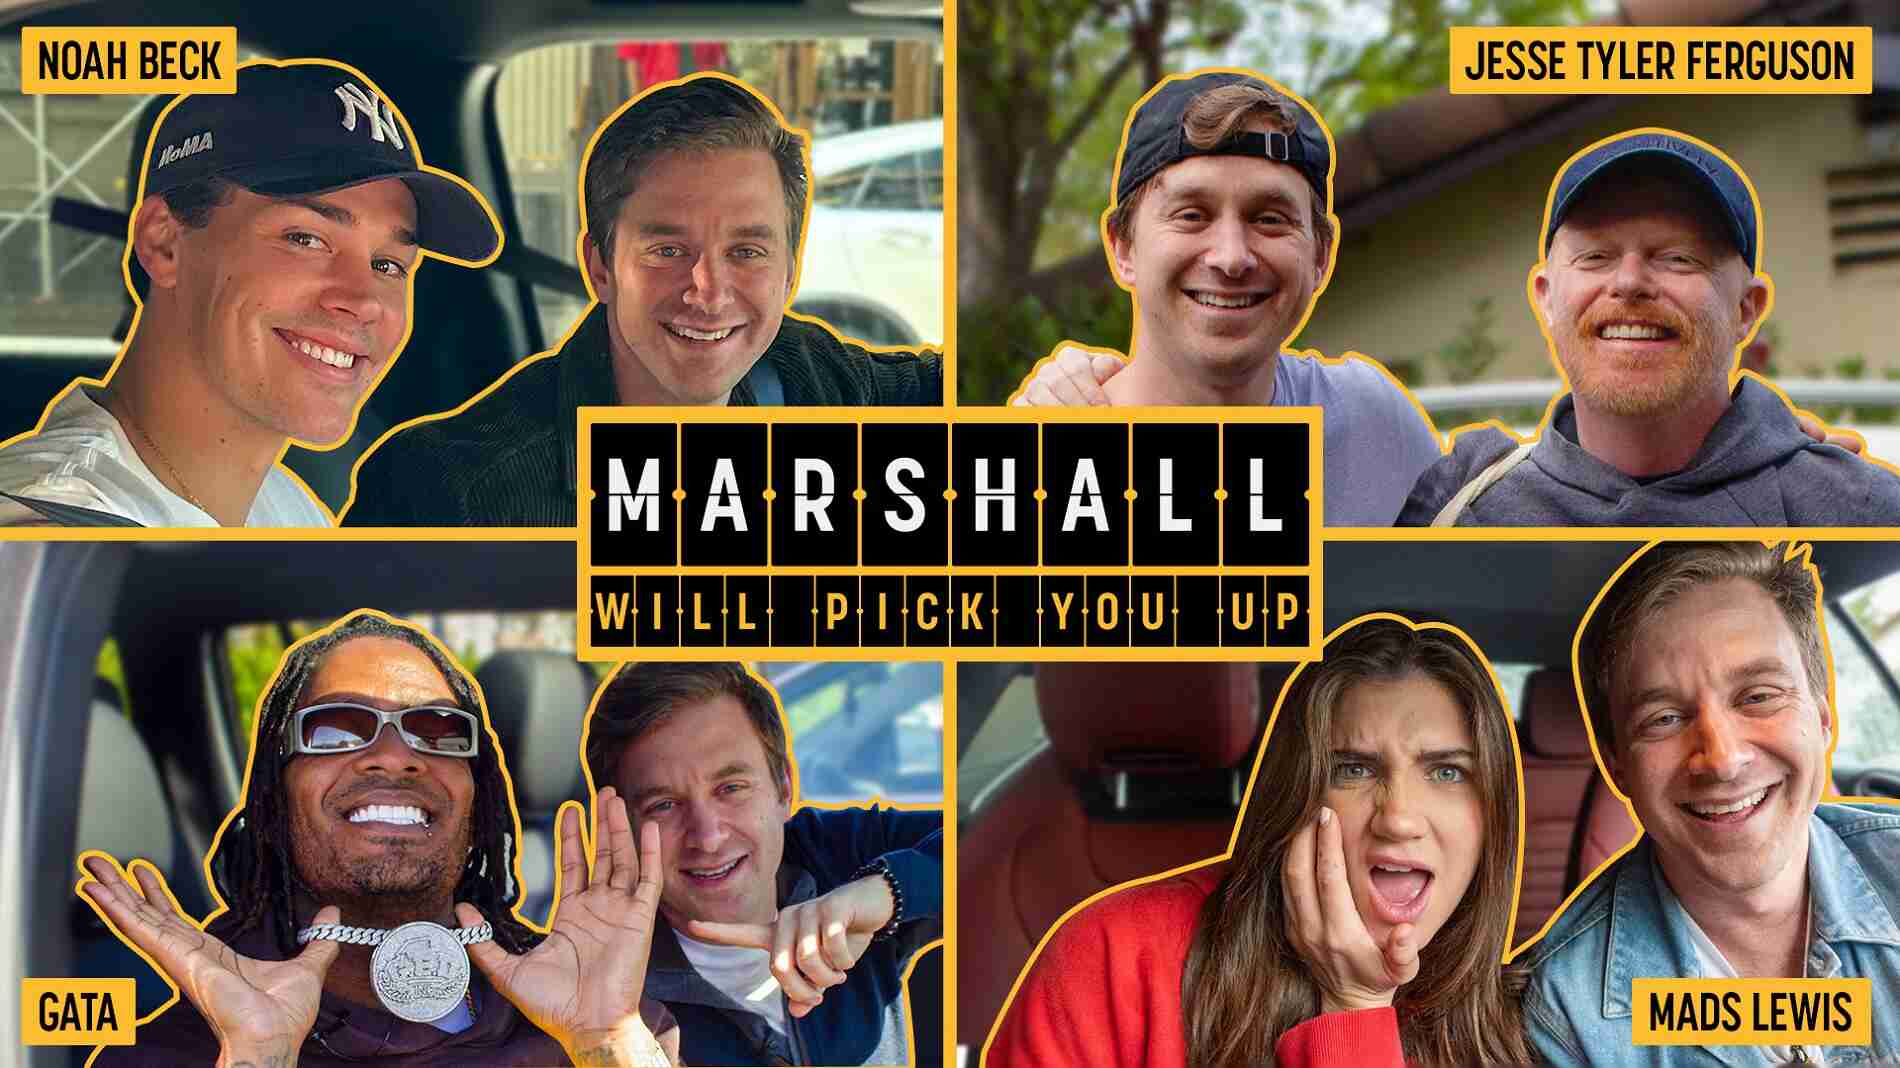 Noah Beck talks love, life, and Iphis in first episode of new digital series ‘Marshall Will Pick You Up’ [Video]